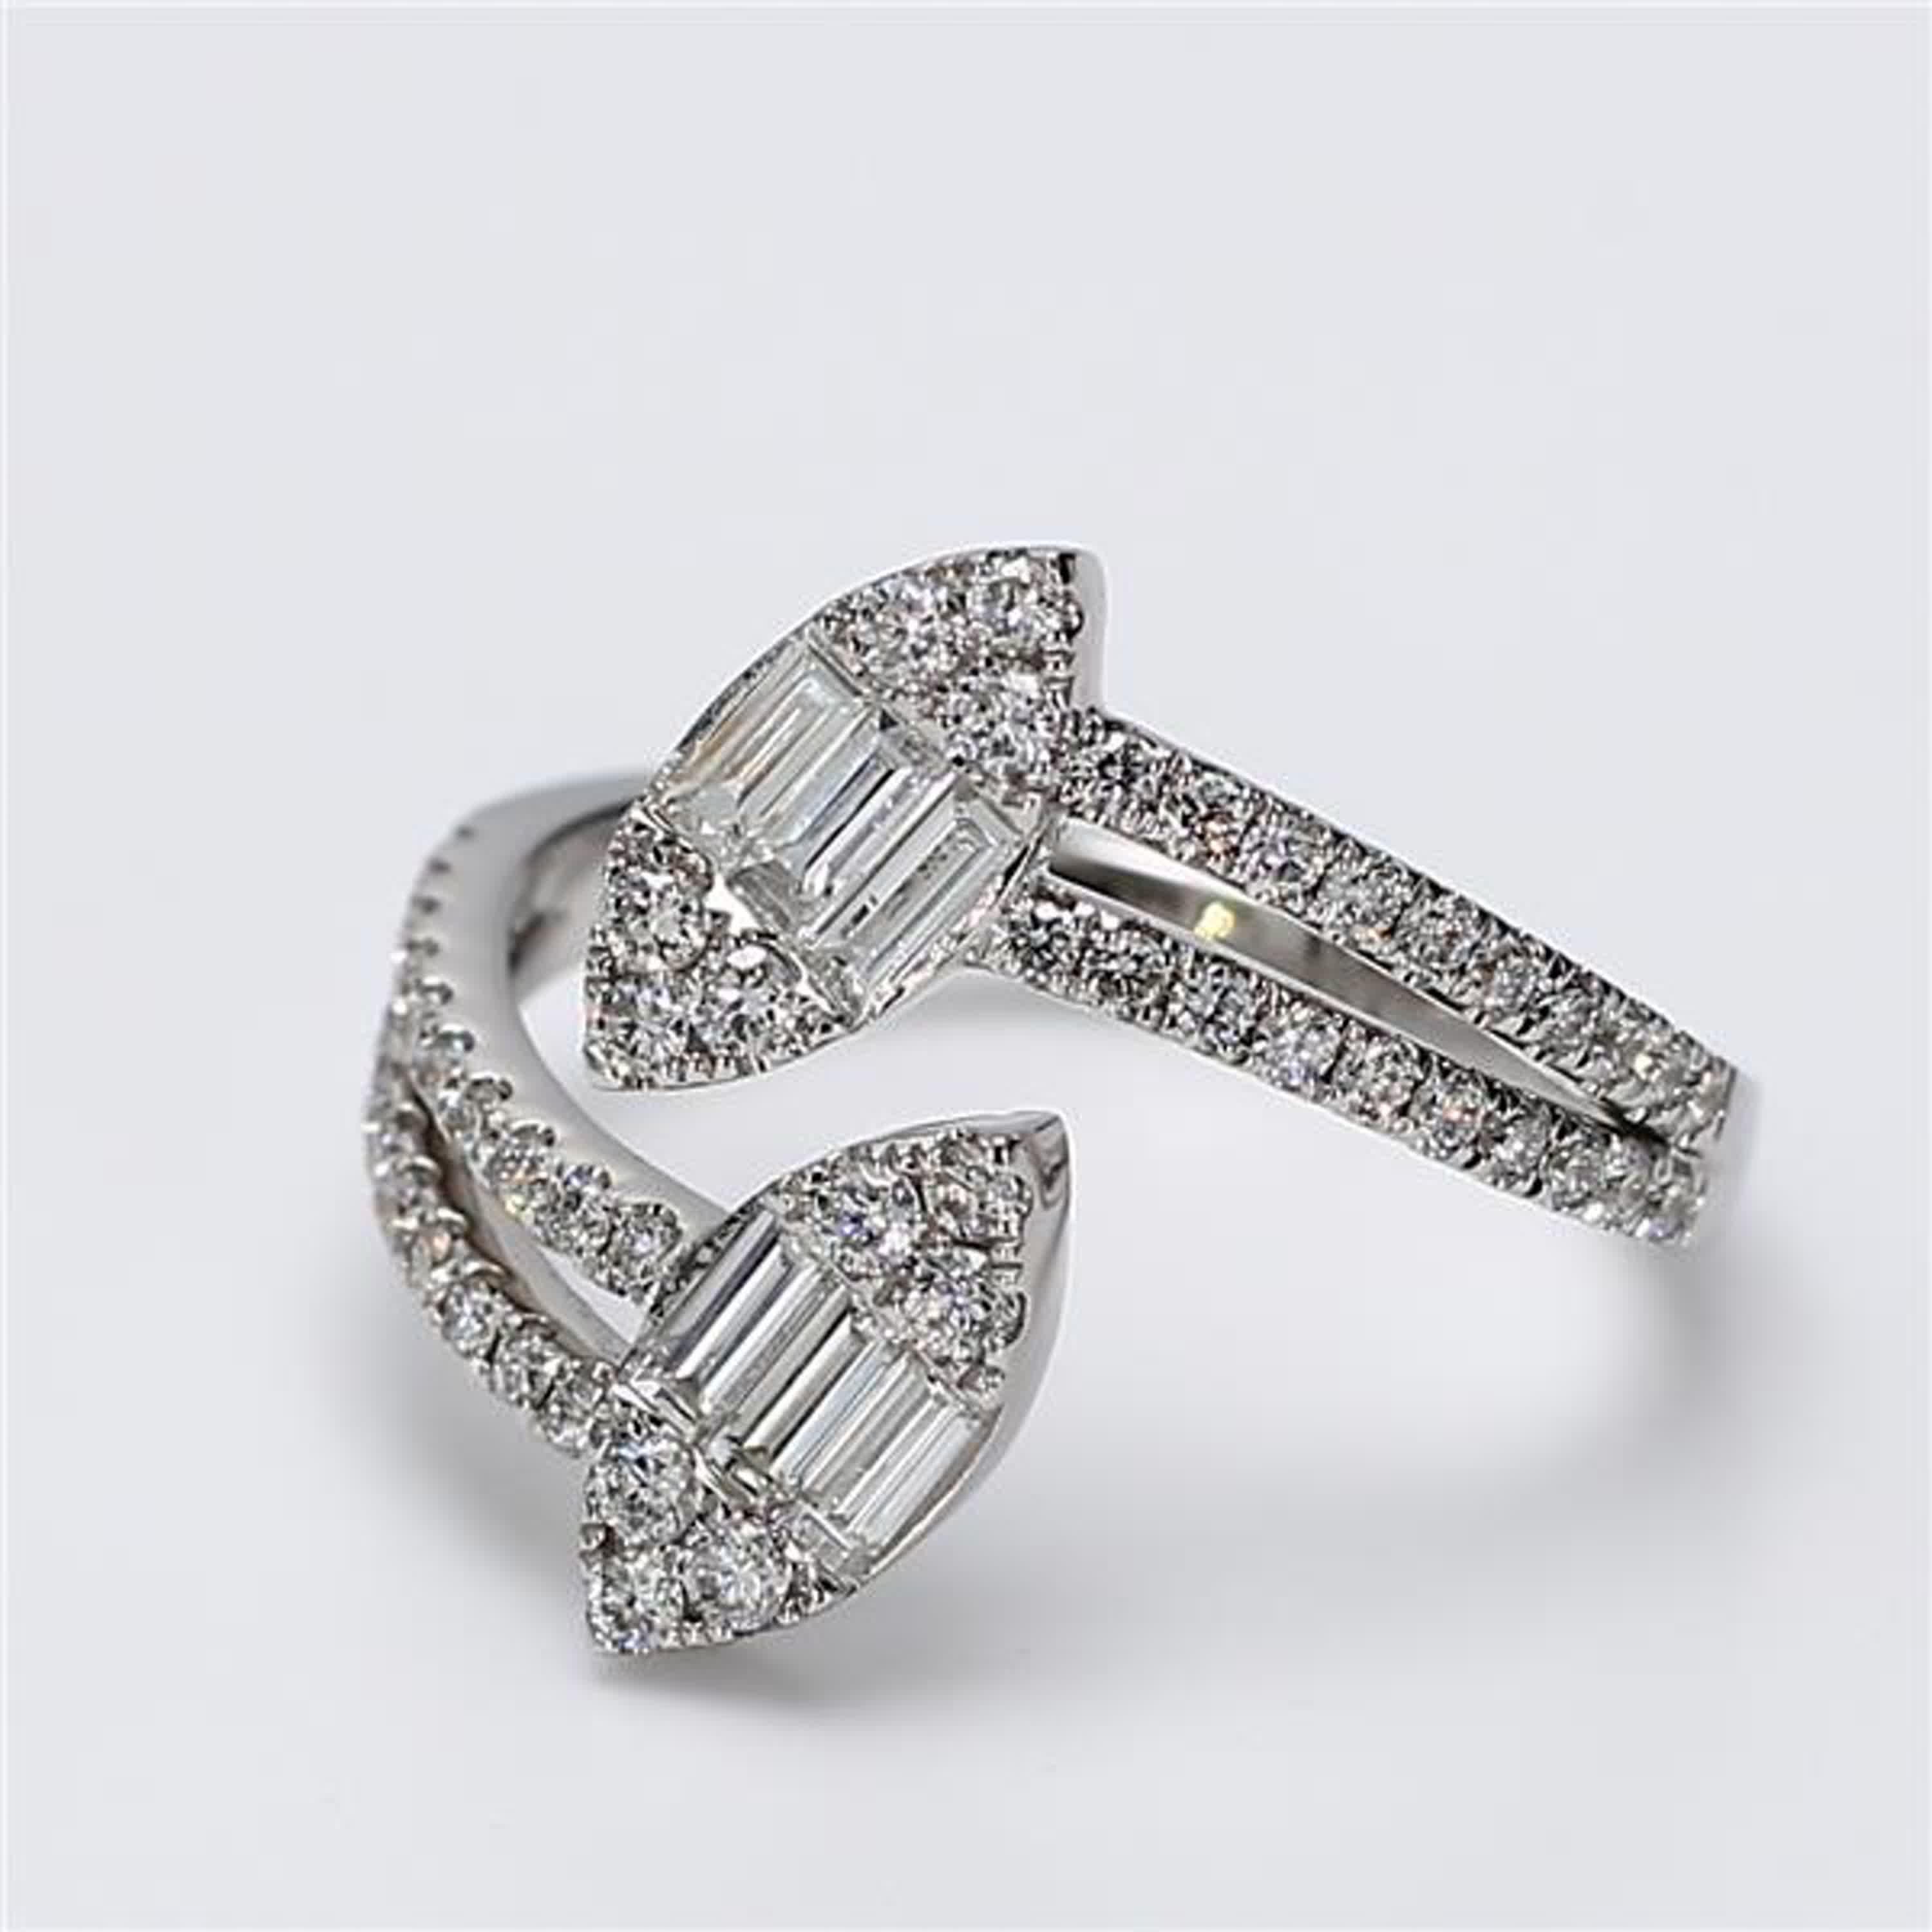 RareGemWorld's classic diamond ring. Mounted in a beautiful 18K White Gold setting with natural baguette white diamonds complimented by natural round white diamond melee. This band is guaranteed to impress and enhance your personal